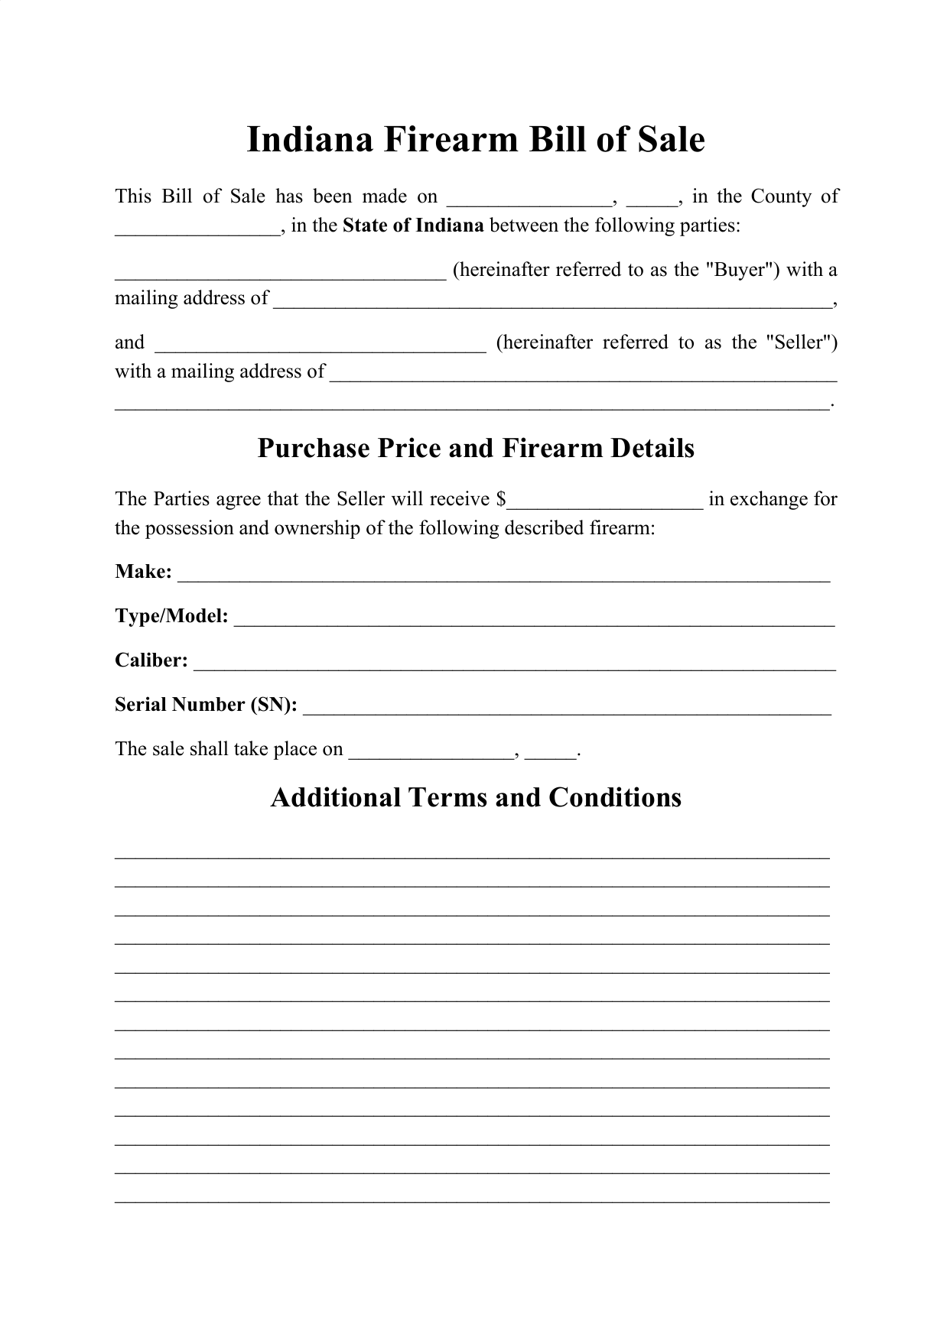 Firearm Bill of Sale Form - Indiana, Page 1